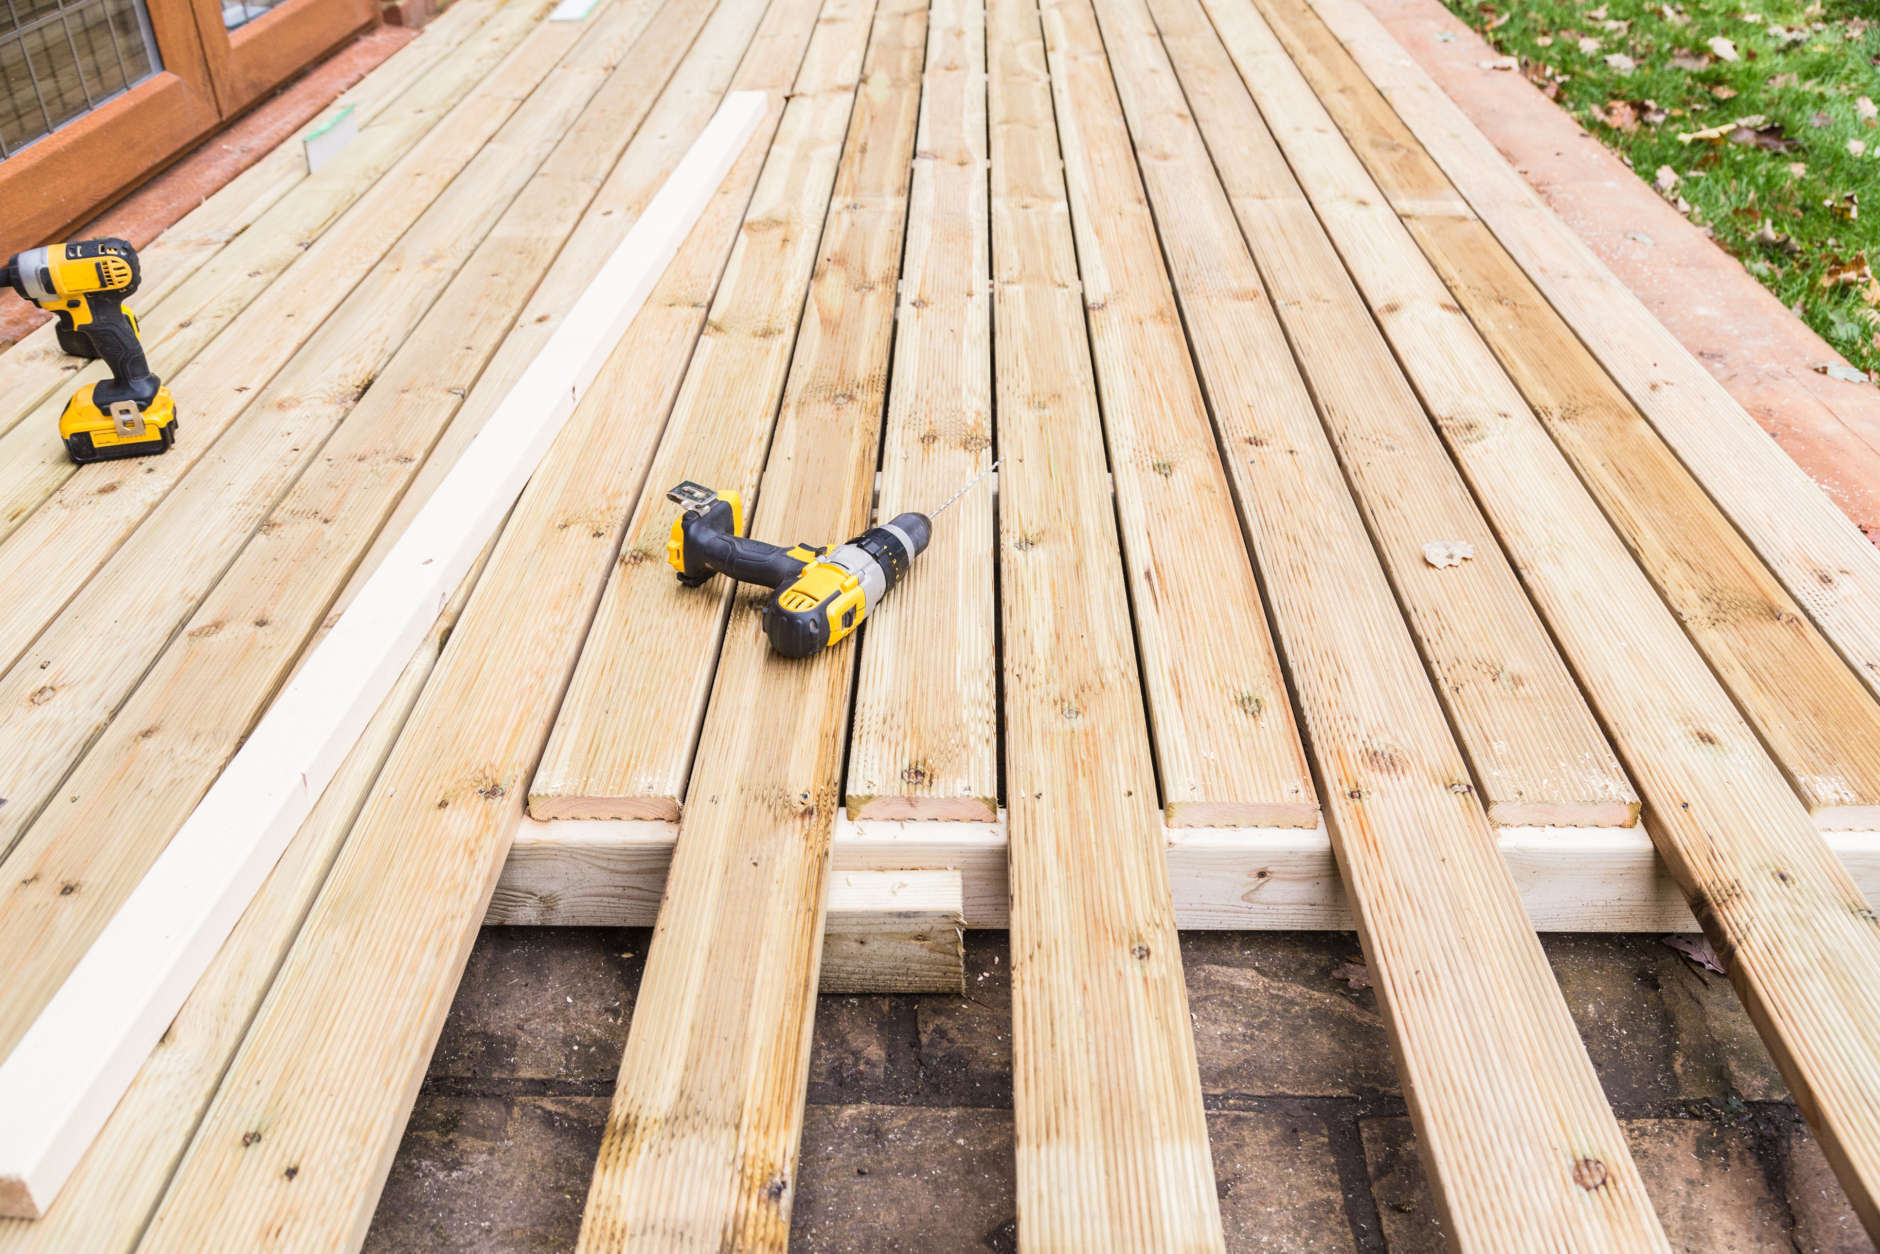 Old, pressure-treated wood in decks contains arsenic and poses a risk to people who touch it with bare feet or hands.  (Thinkstock)